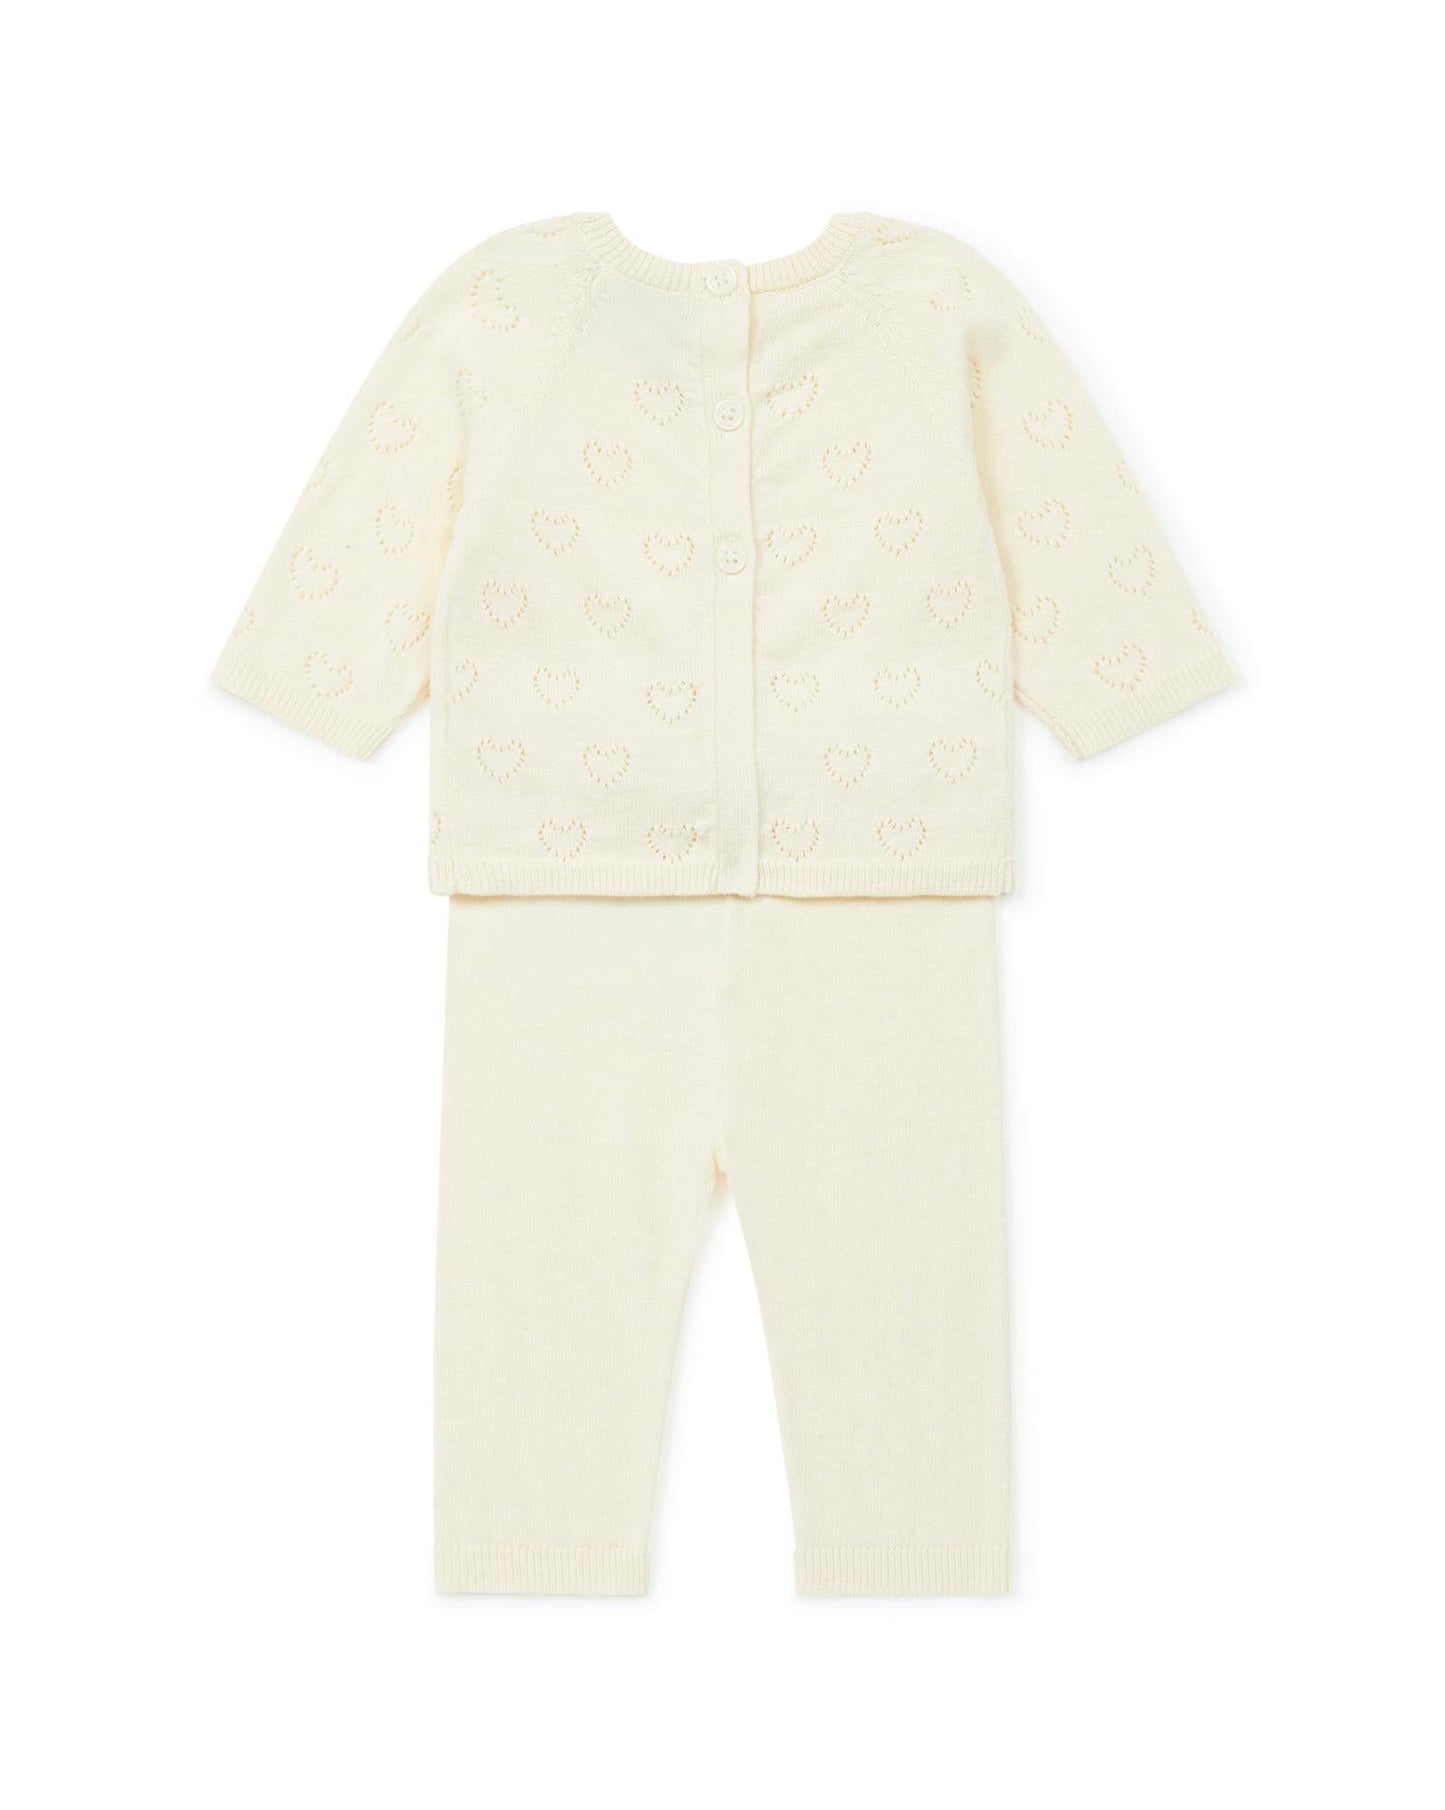 Outfit of Newborn Beige Baby Cotton open -minded Cashmere